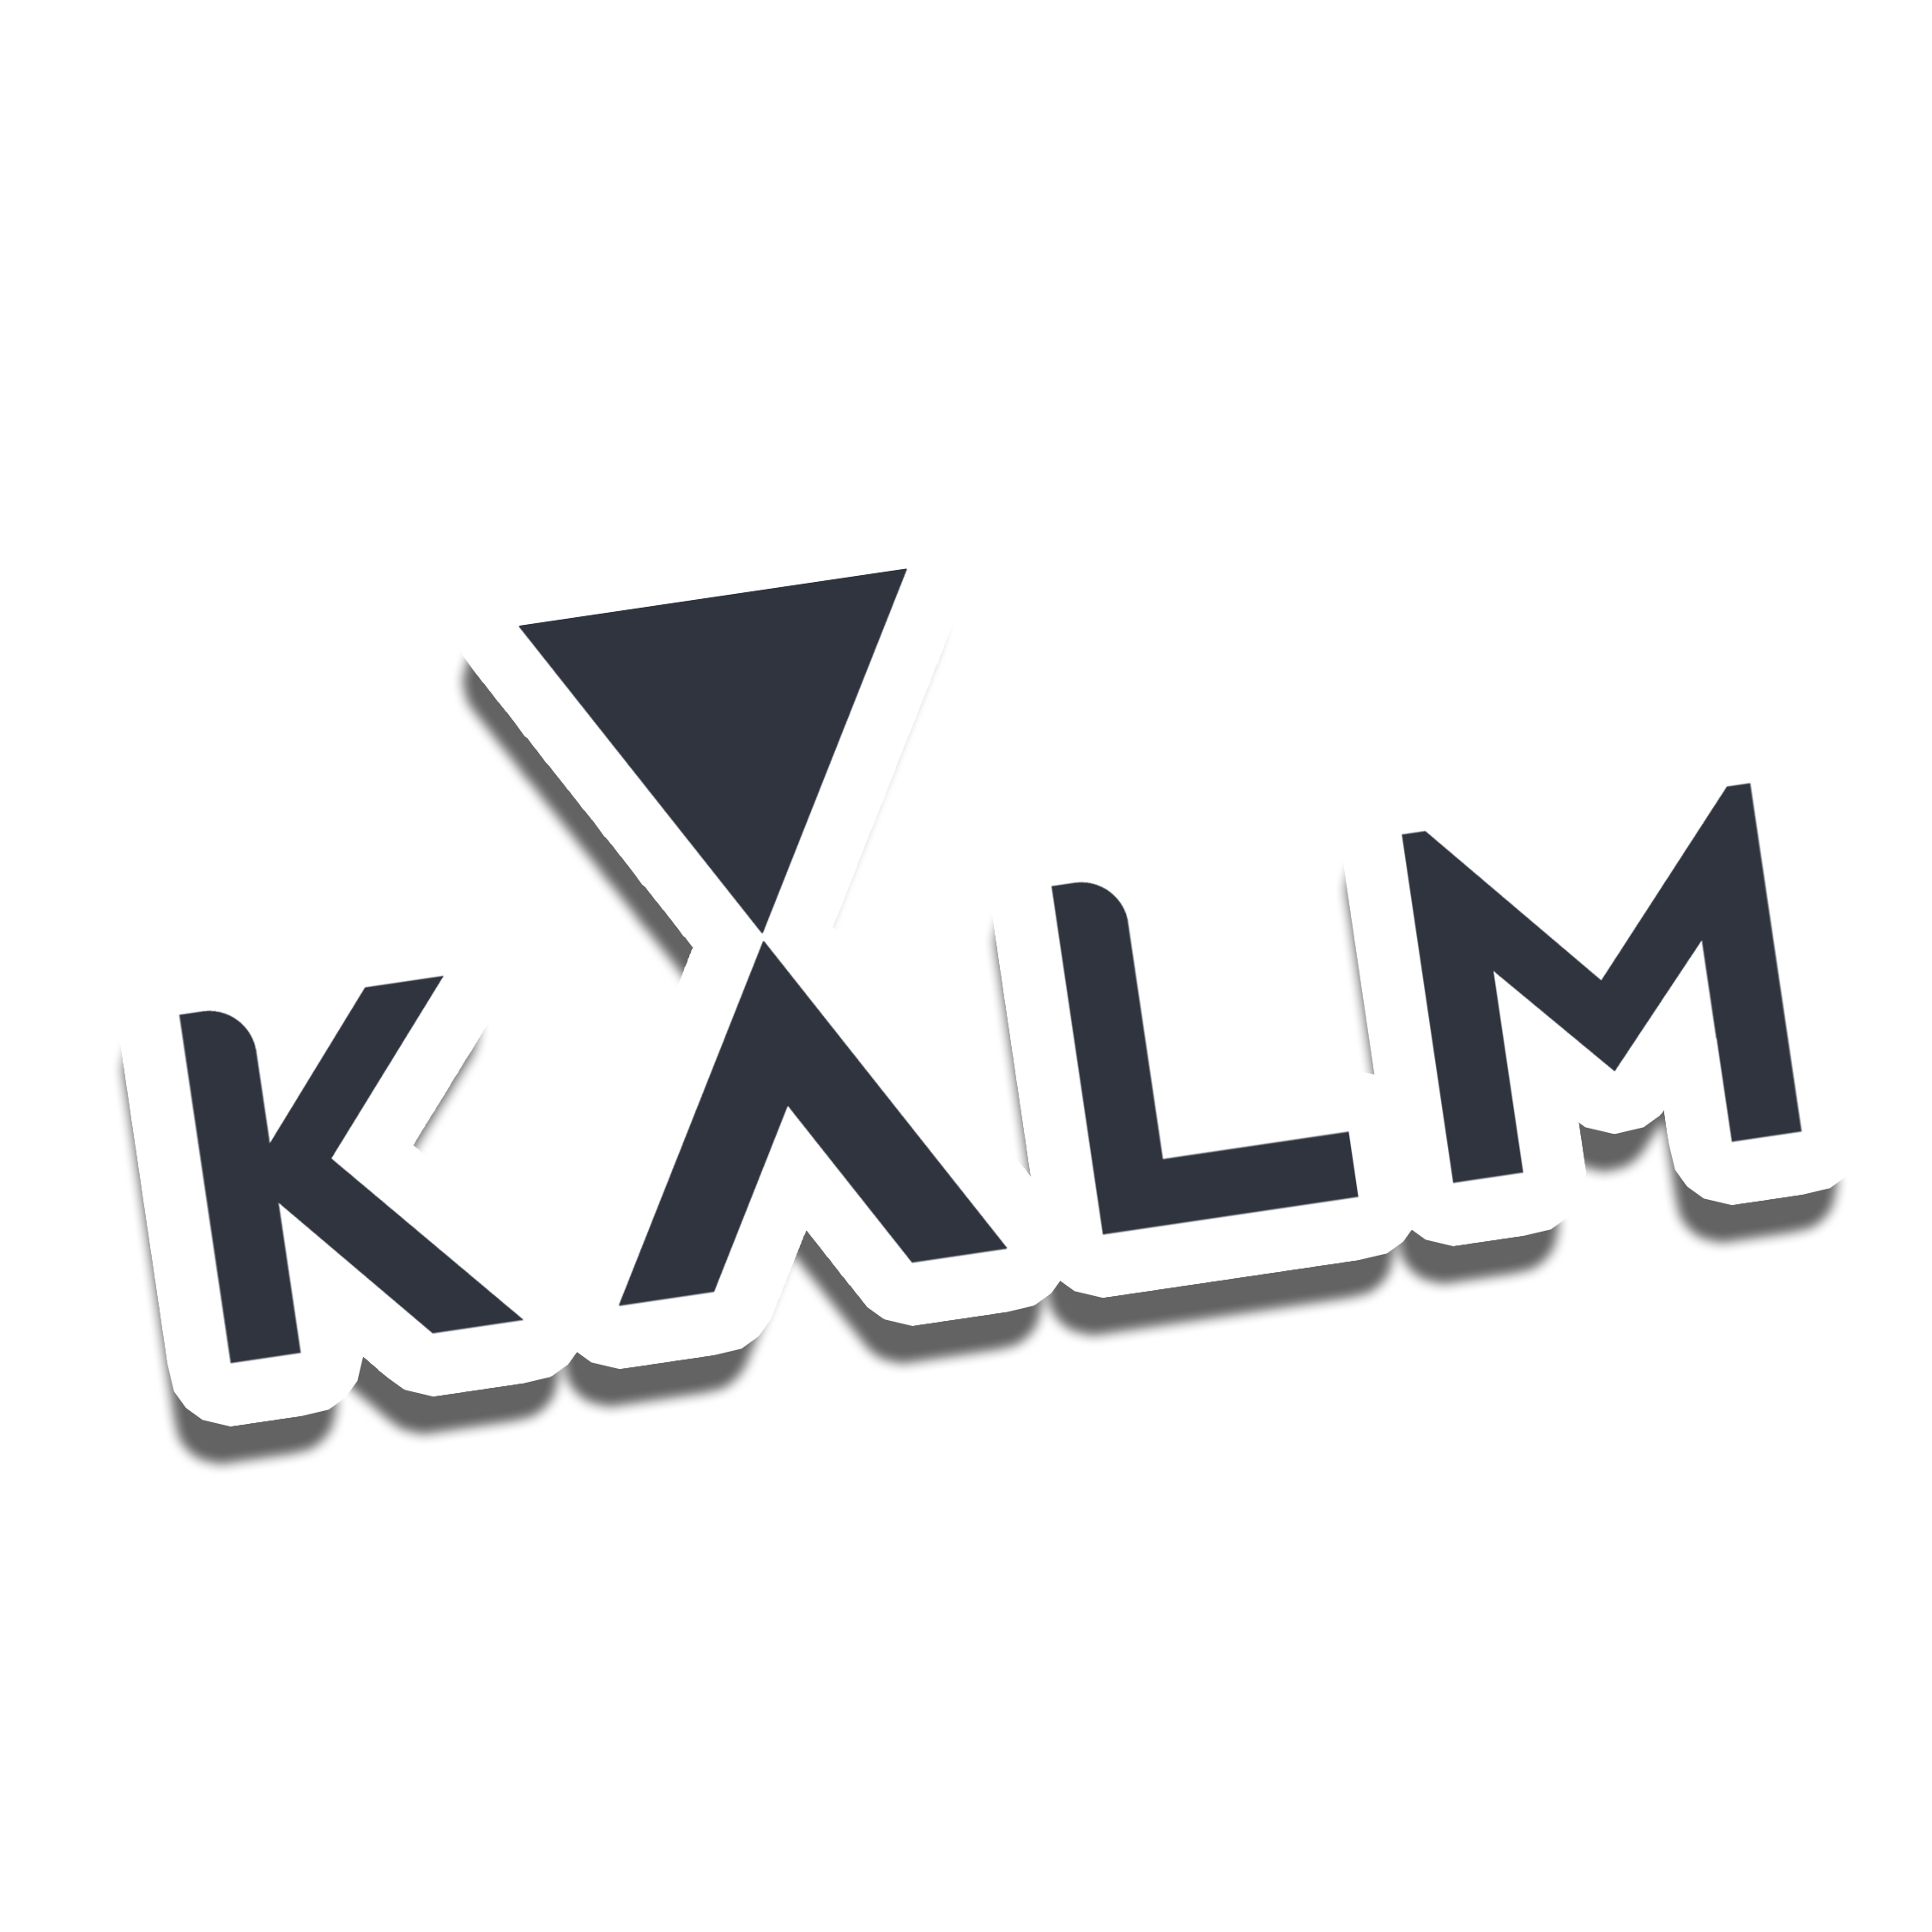 Kalm ''KALM'' Sticker. Personalize Anything with Our Stickers, Durable and Water-Resistant